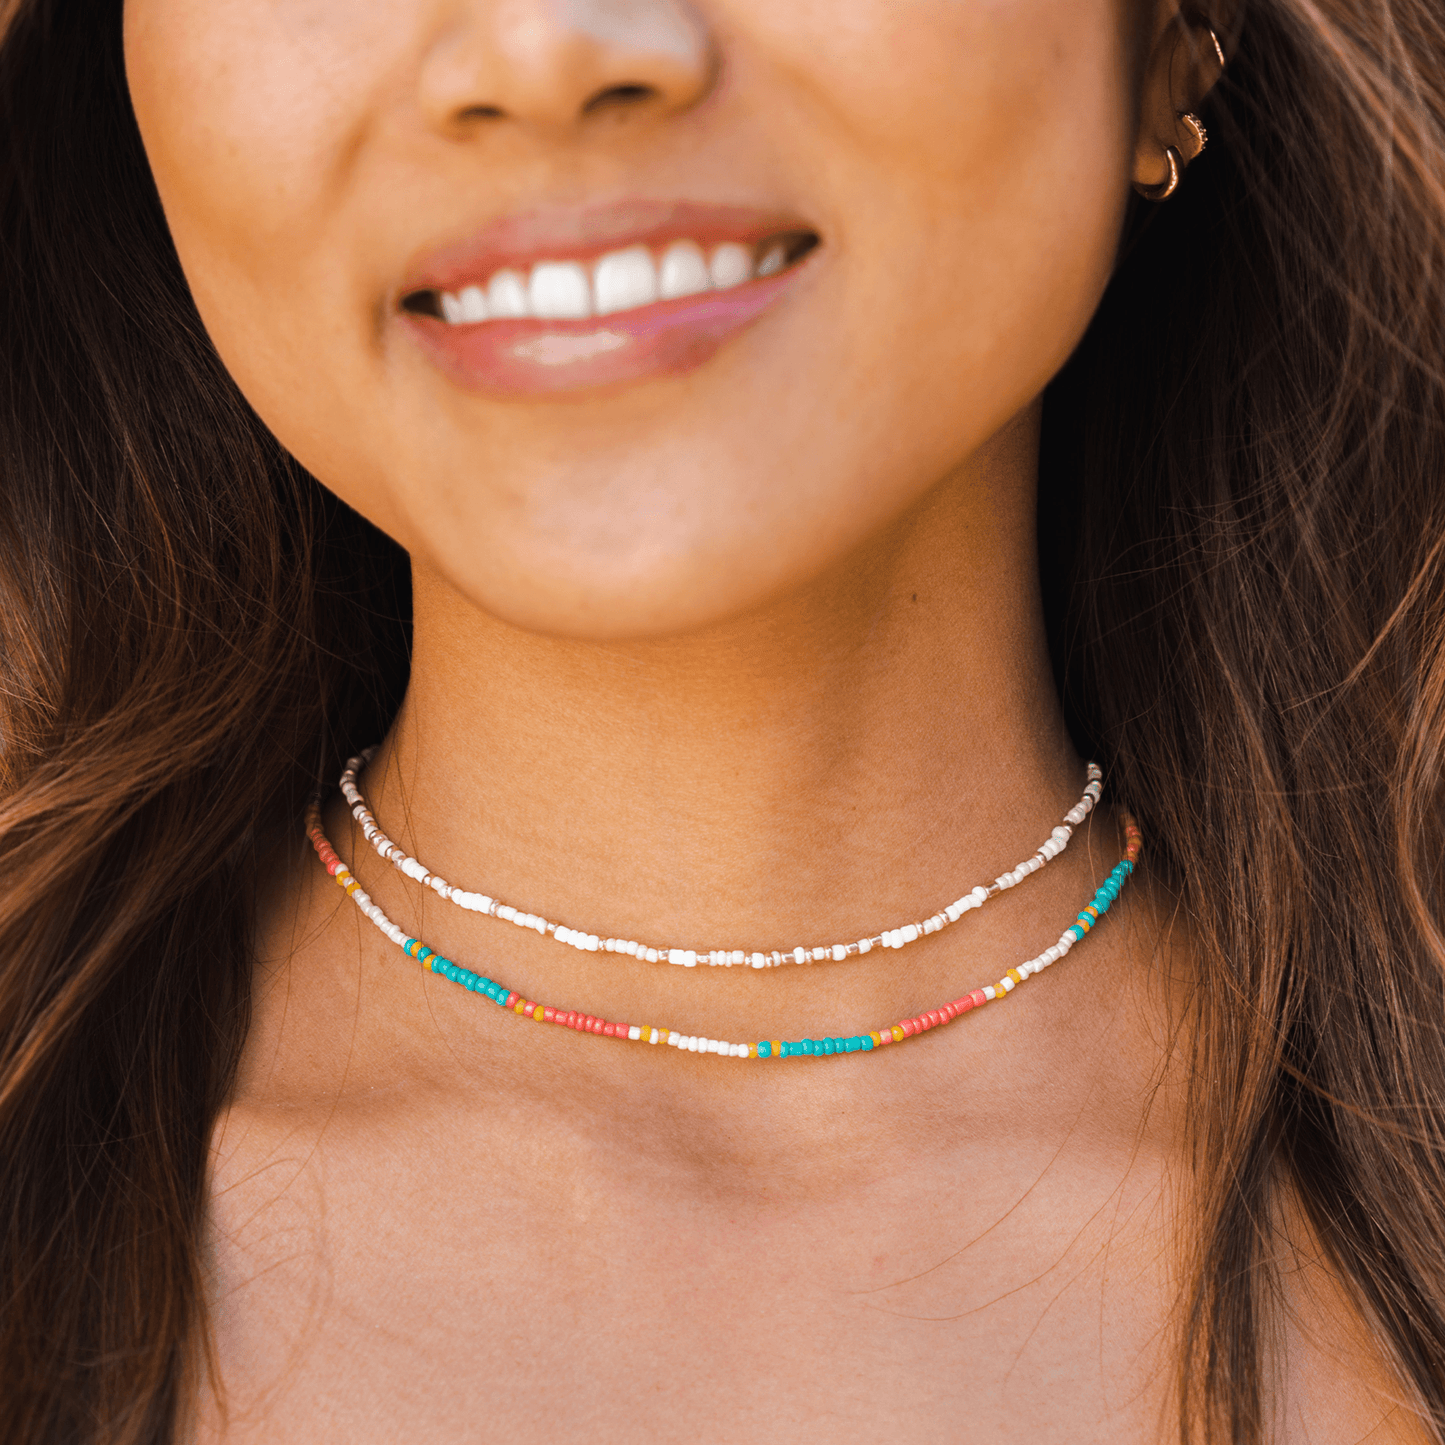 Summer Daze Necklace - The Salty Mare